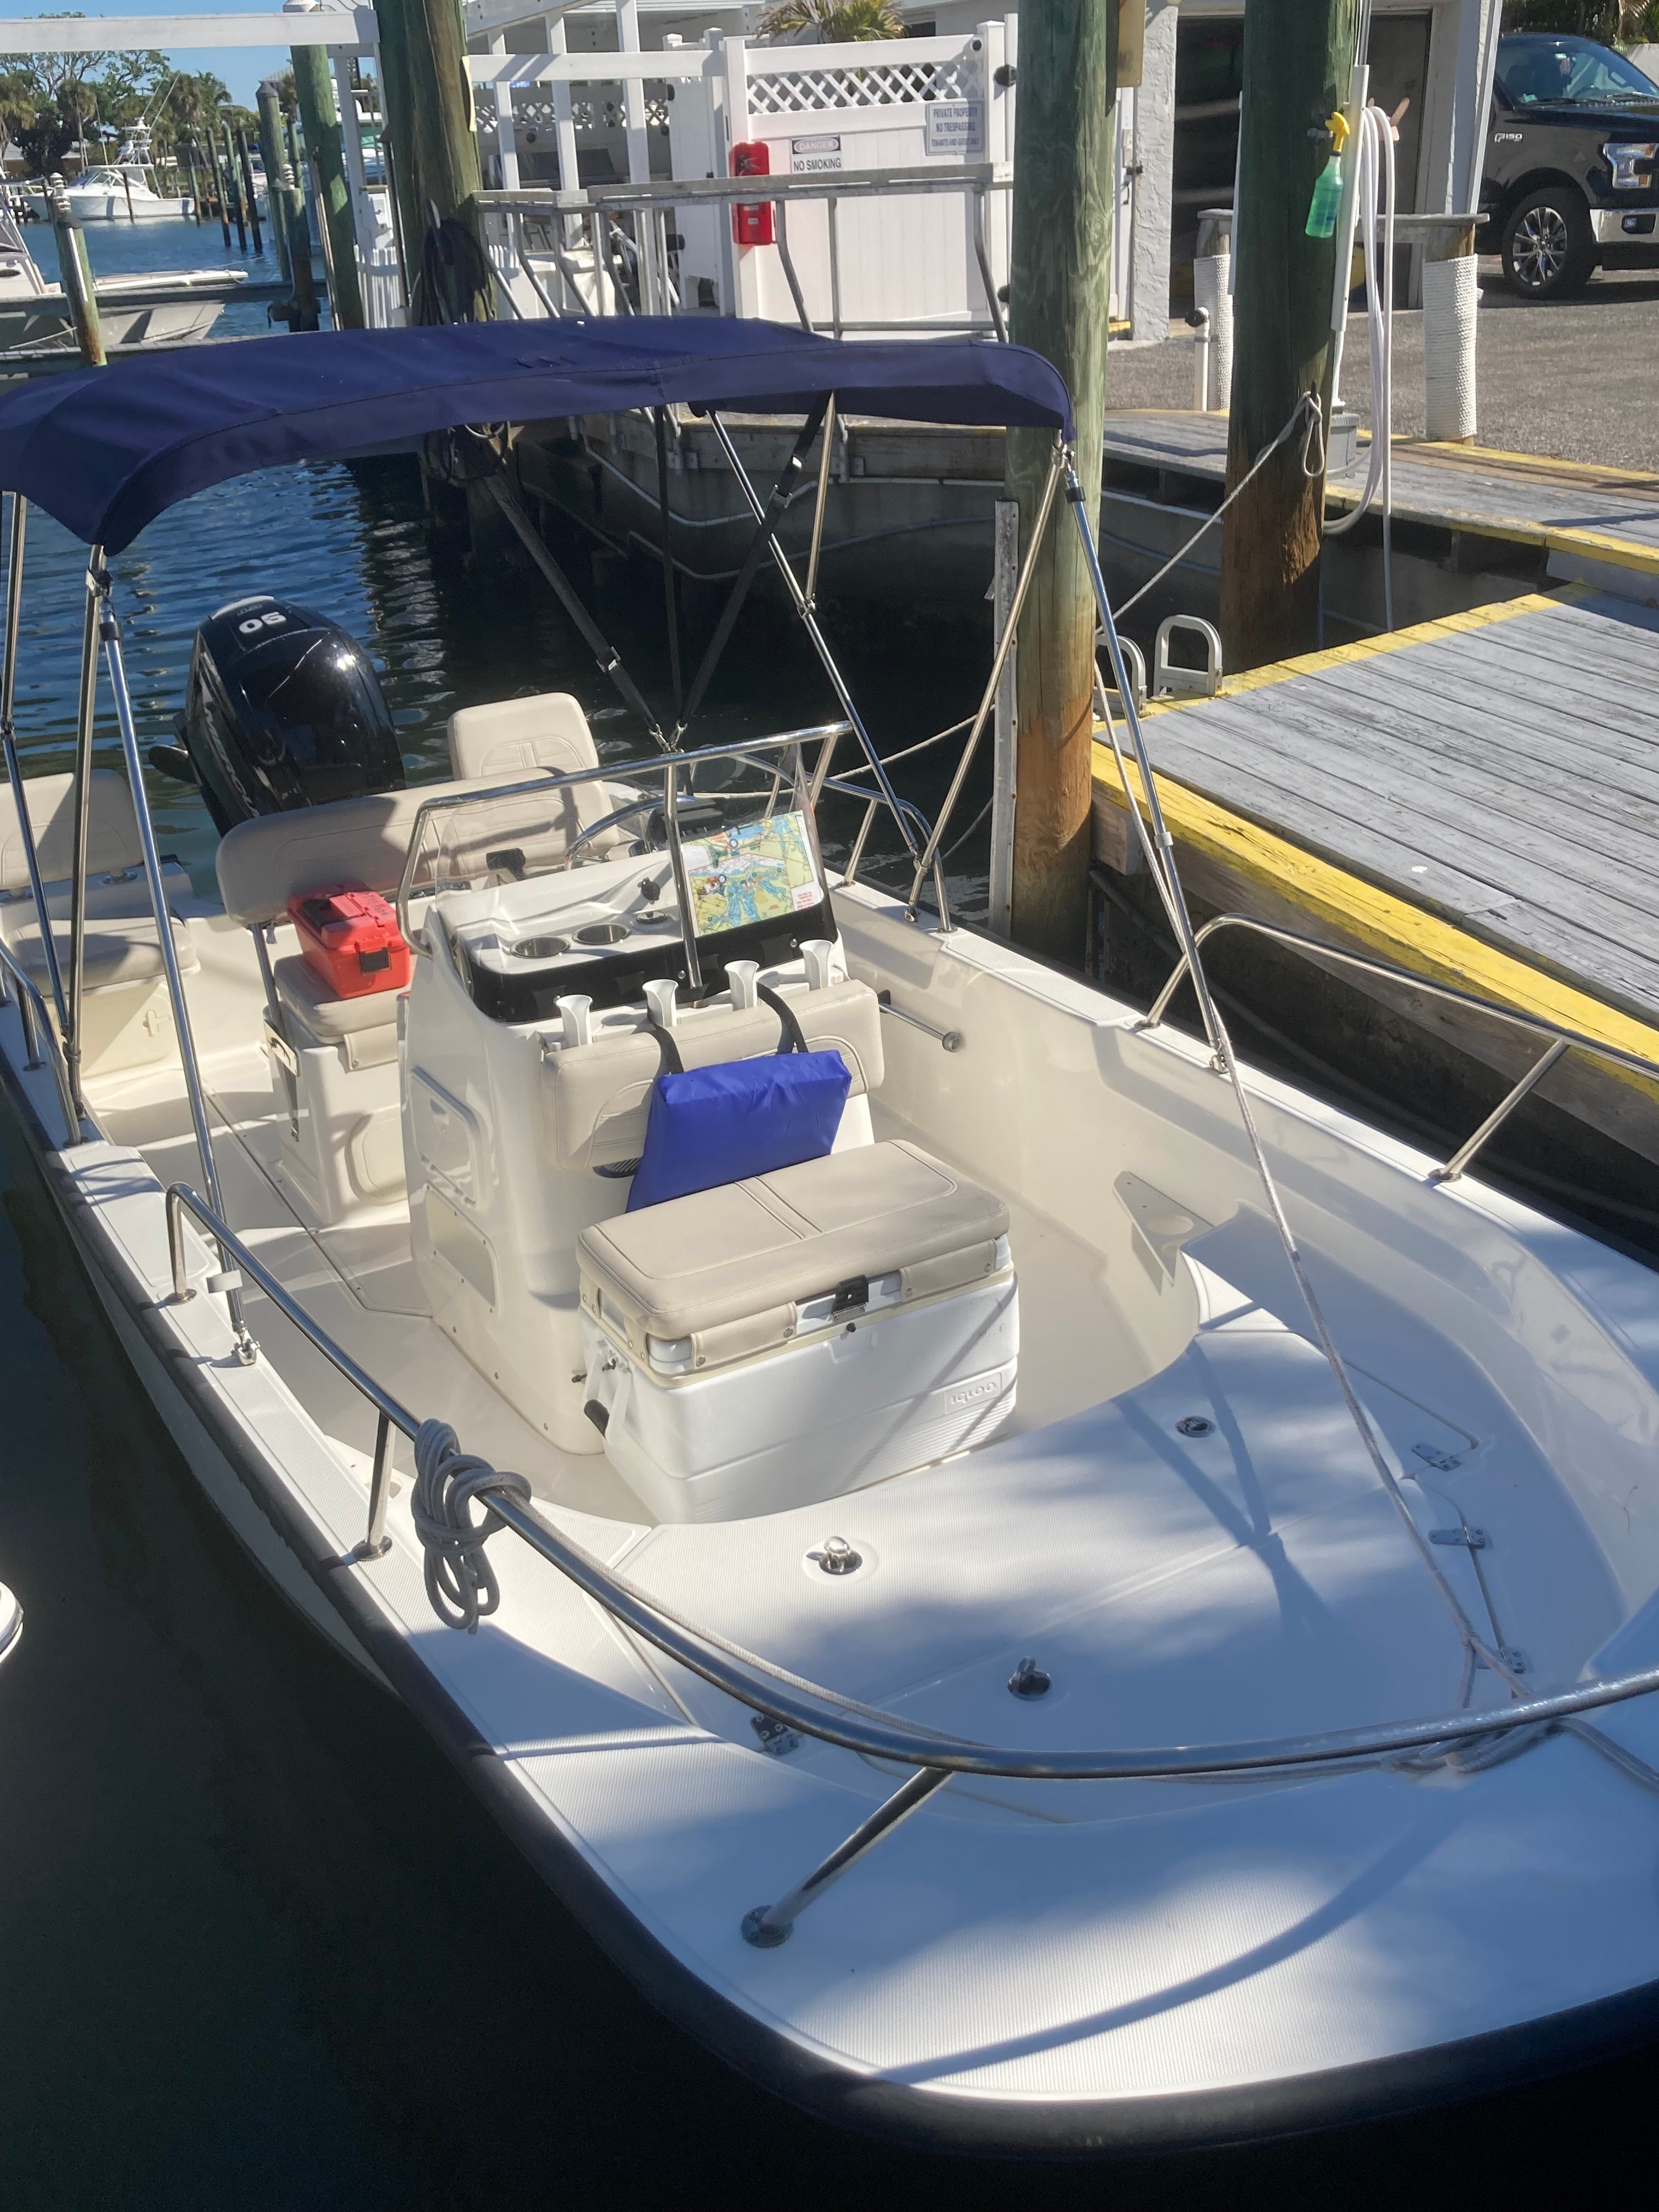 HIT THE RODE (17' Center Console-Boston Whaler- 90 HP-Fishing)